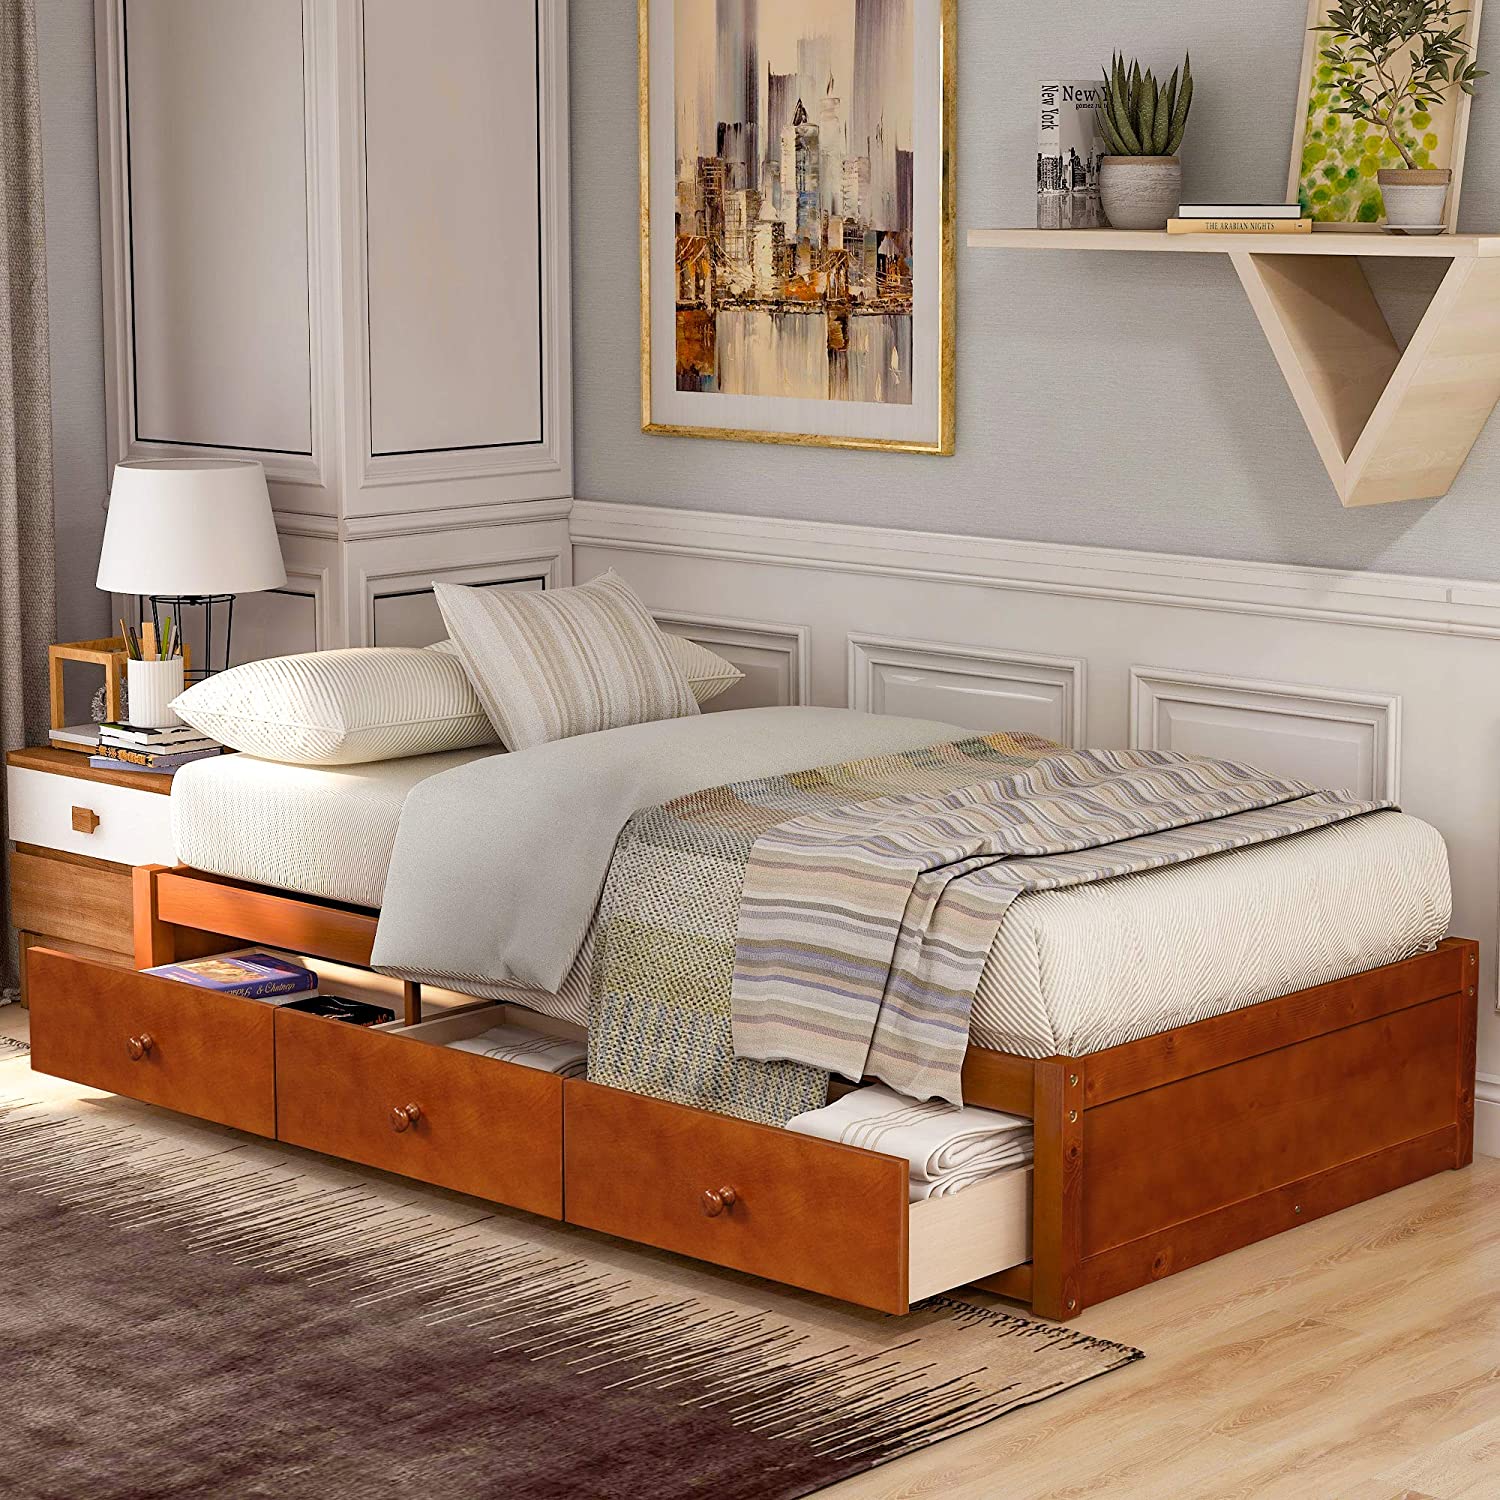 Bed With Compartment The, Memomad Bali Storage Platform Bed With Drawers Twin Size Off White